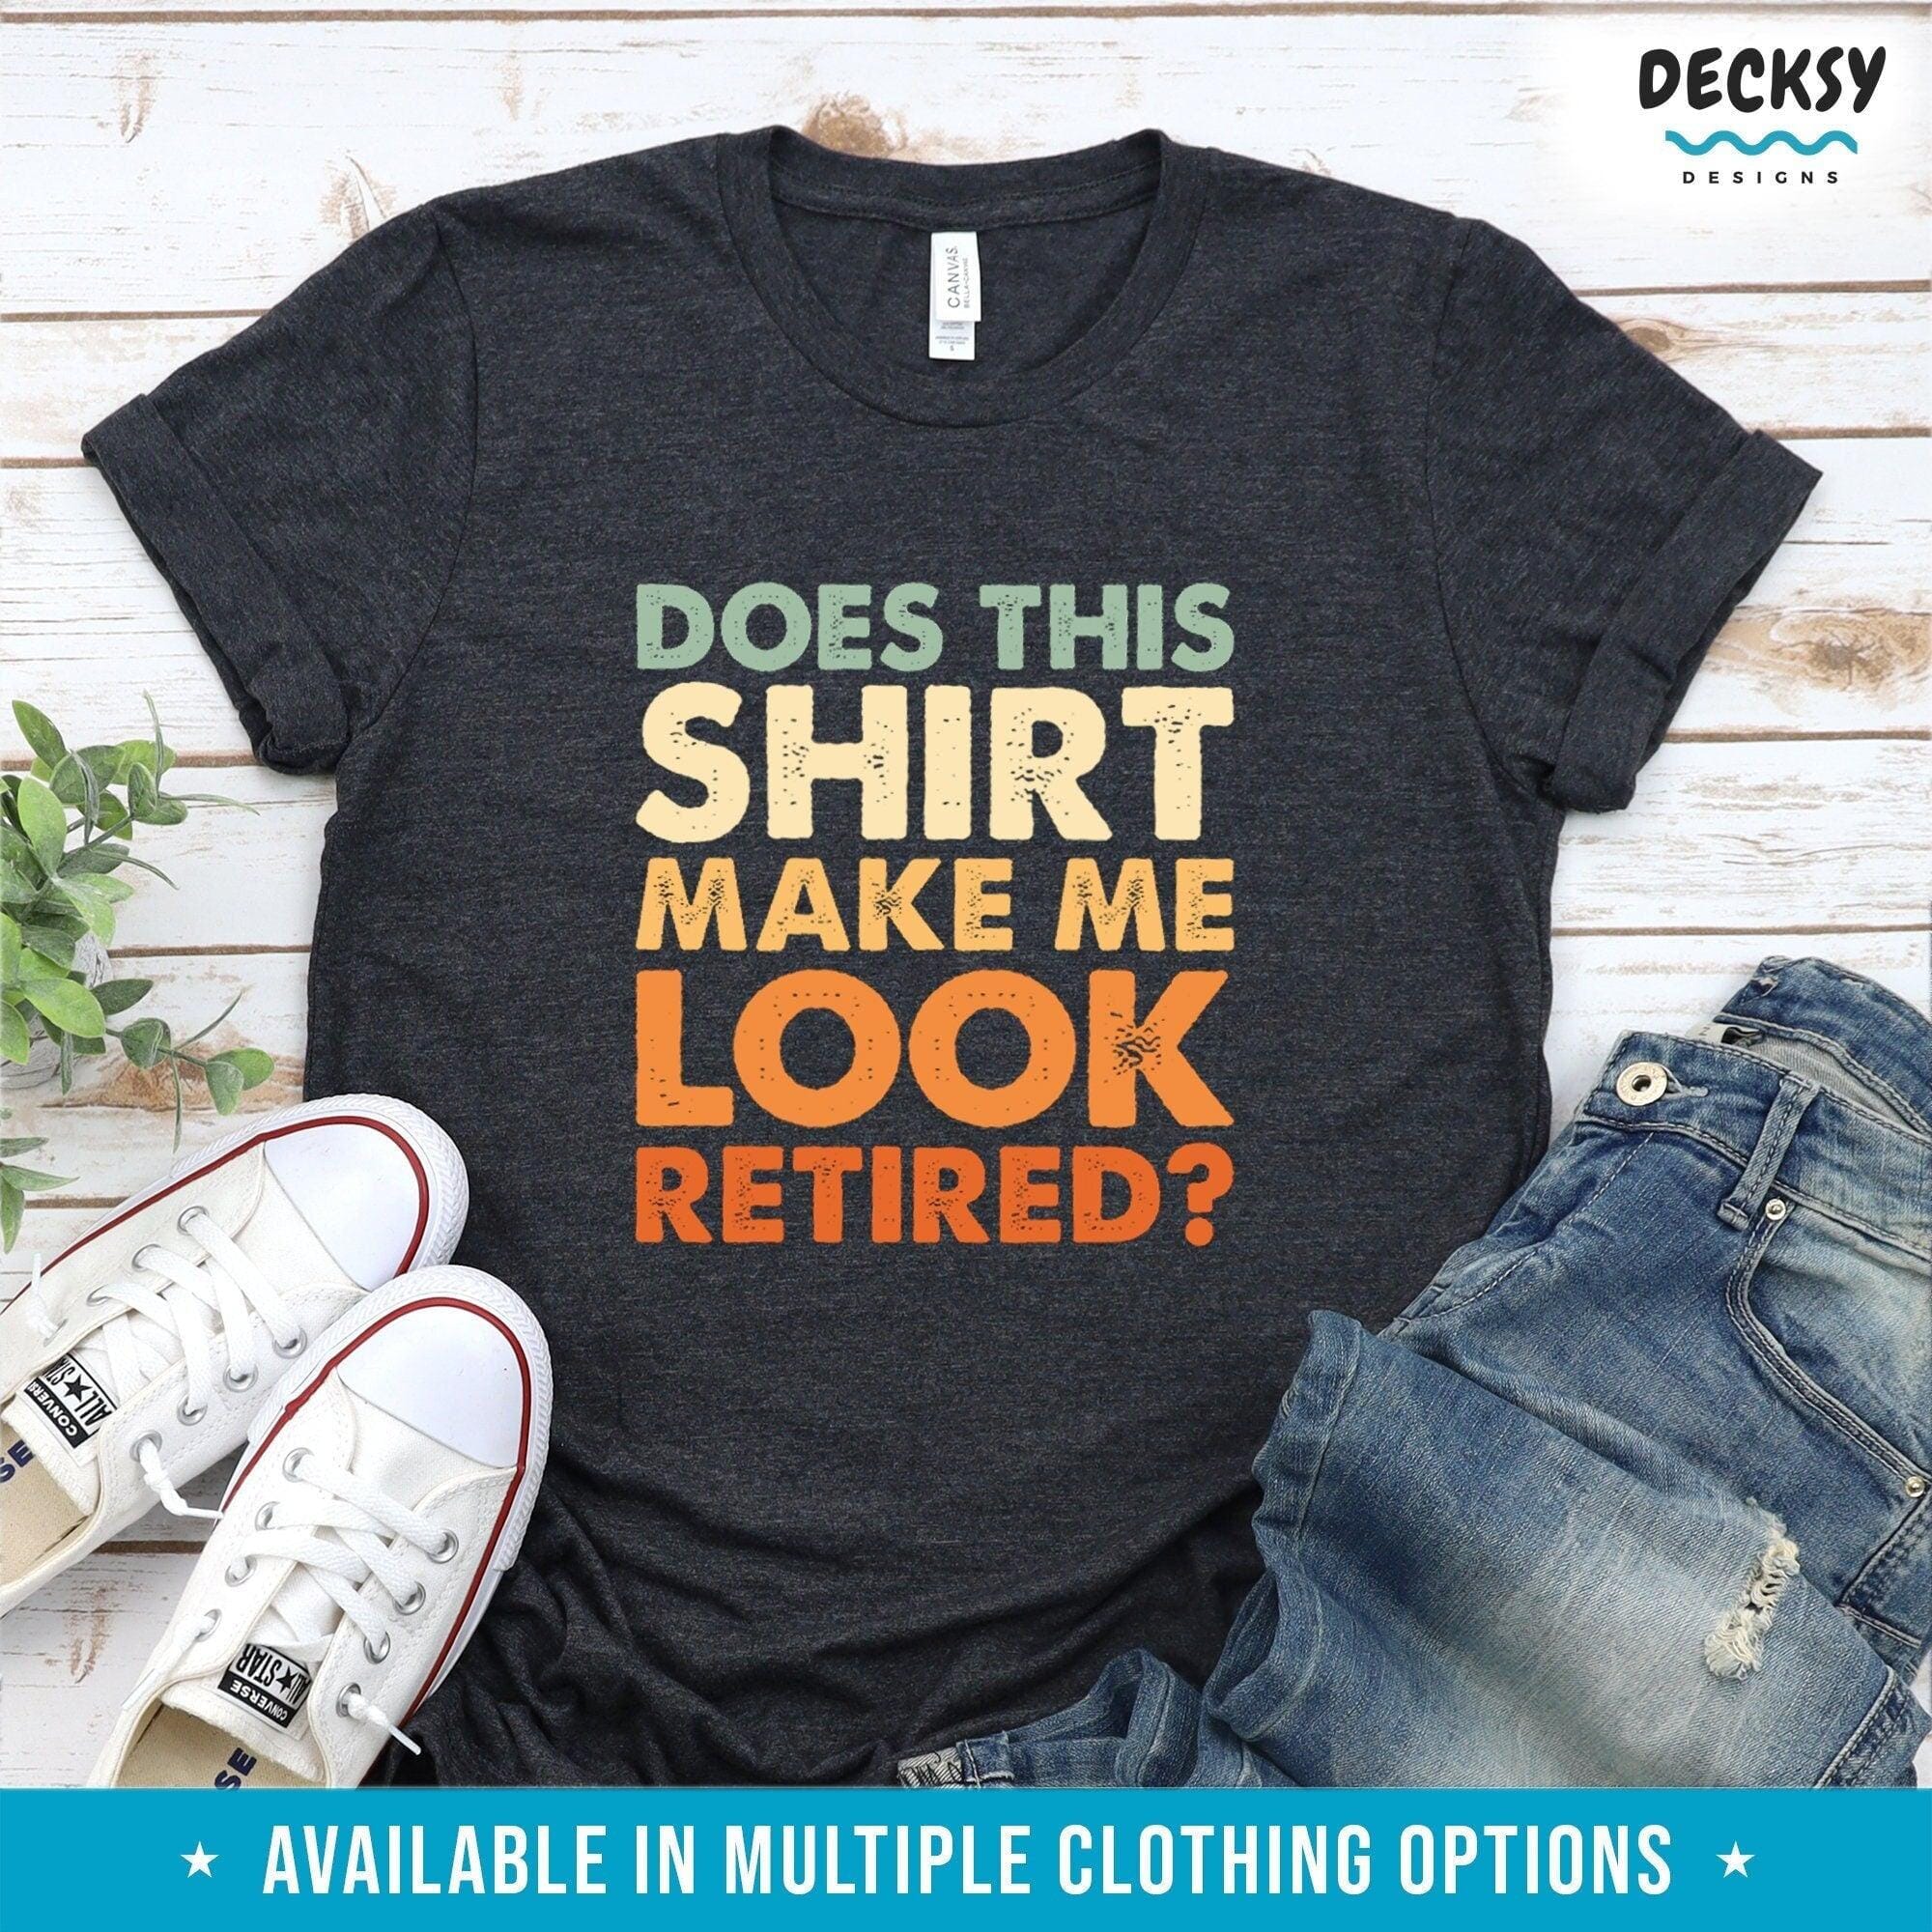 Retirement Shirt, Gift For Retired Coworker-Clothing:Gender-Neutral Adult Clothing:Tops & Tees:T-shirts:Graphic Tees-DecksyDesigns